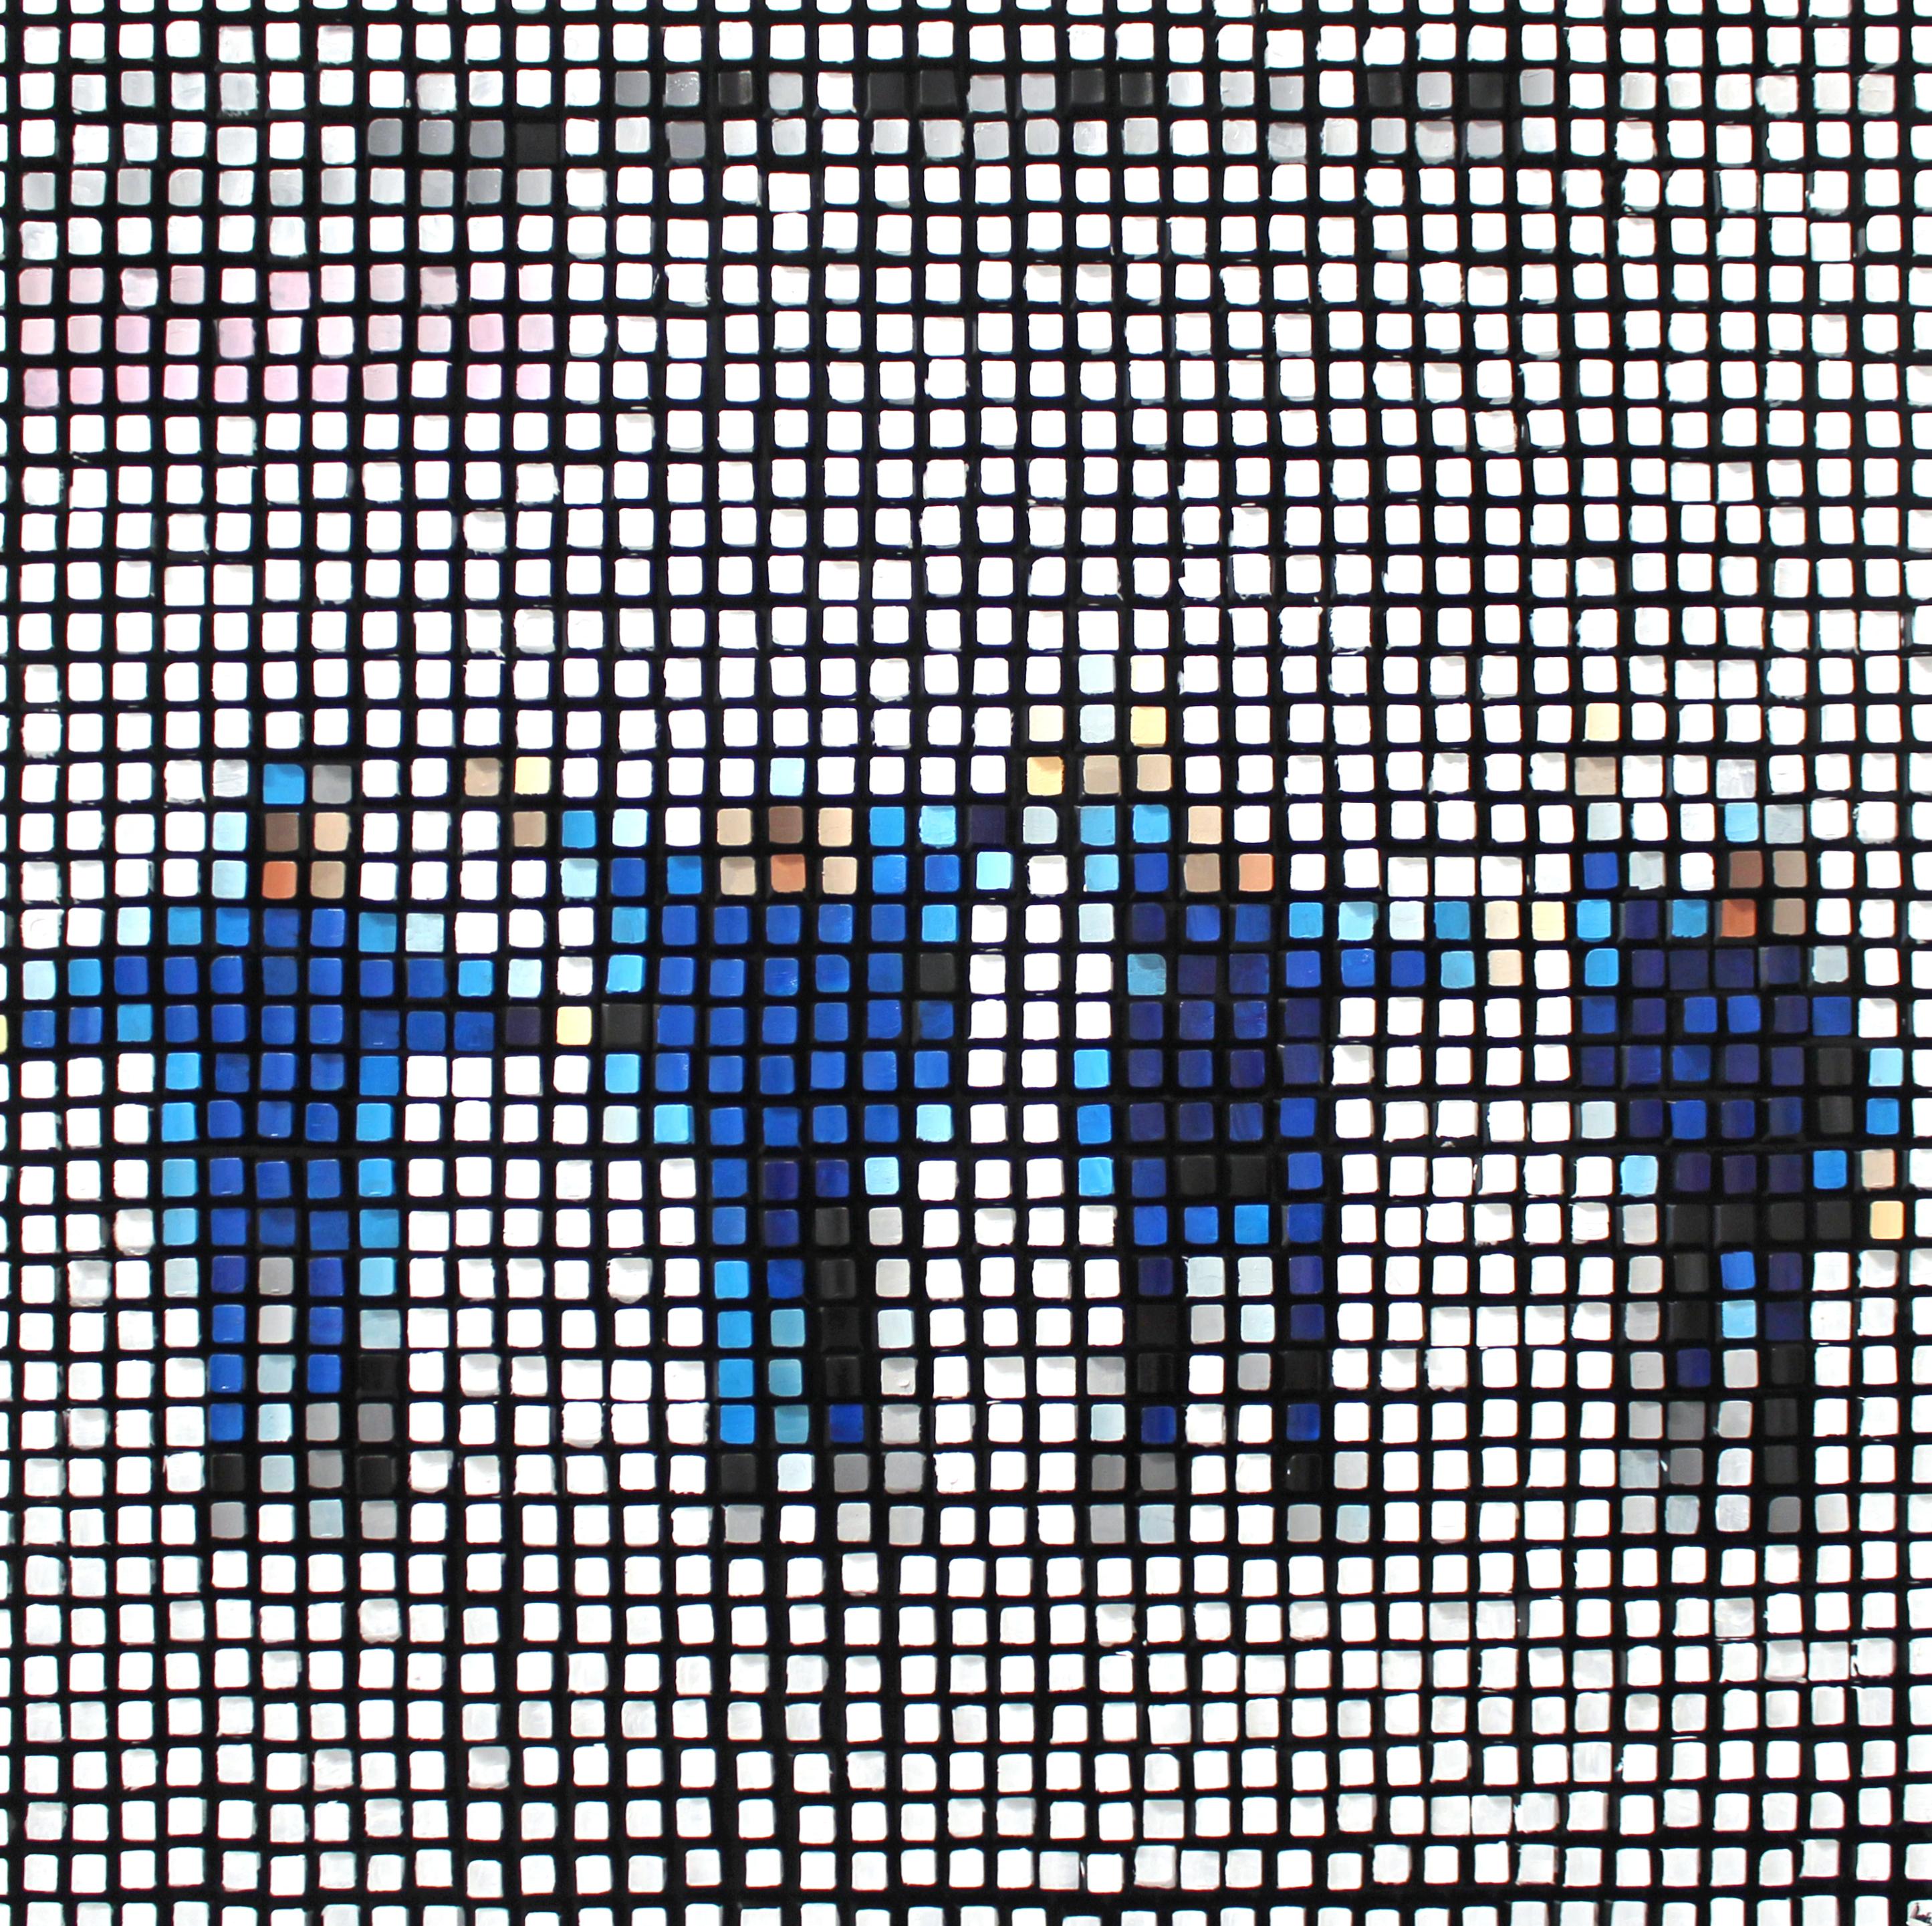 Pixel Remaster Series: Help! (The Beatles), Acrylic and Keyboard Keys on Panel - Mixed Media Art by Georges Monfils